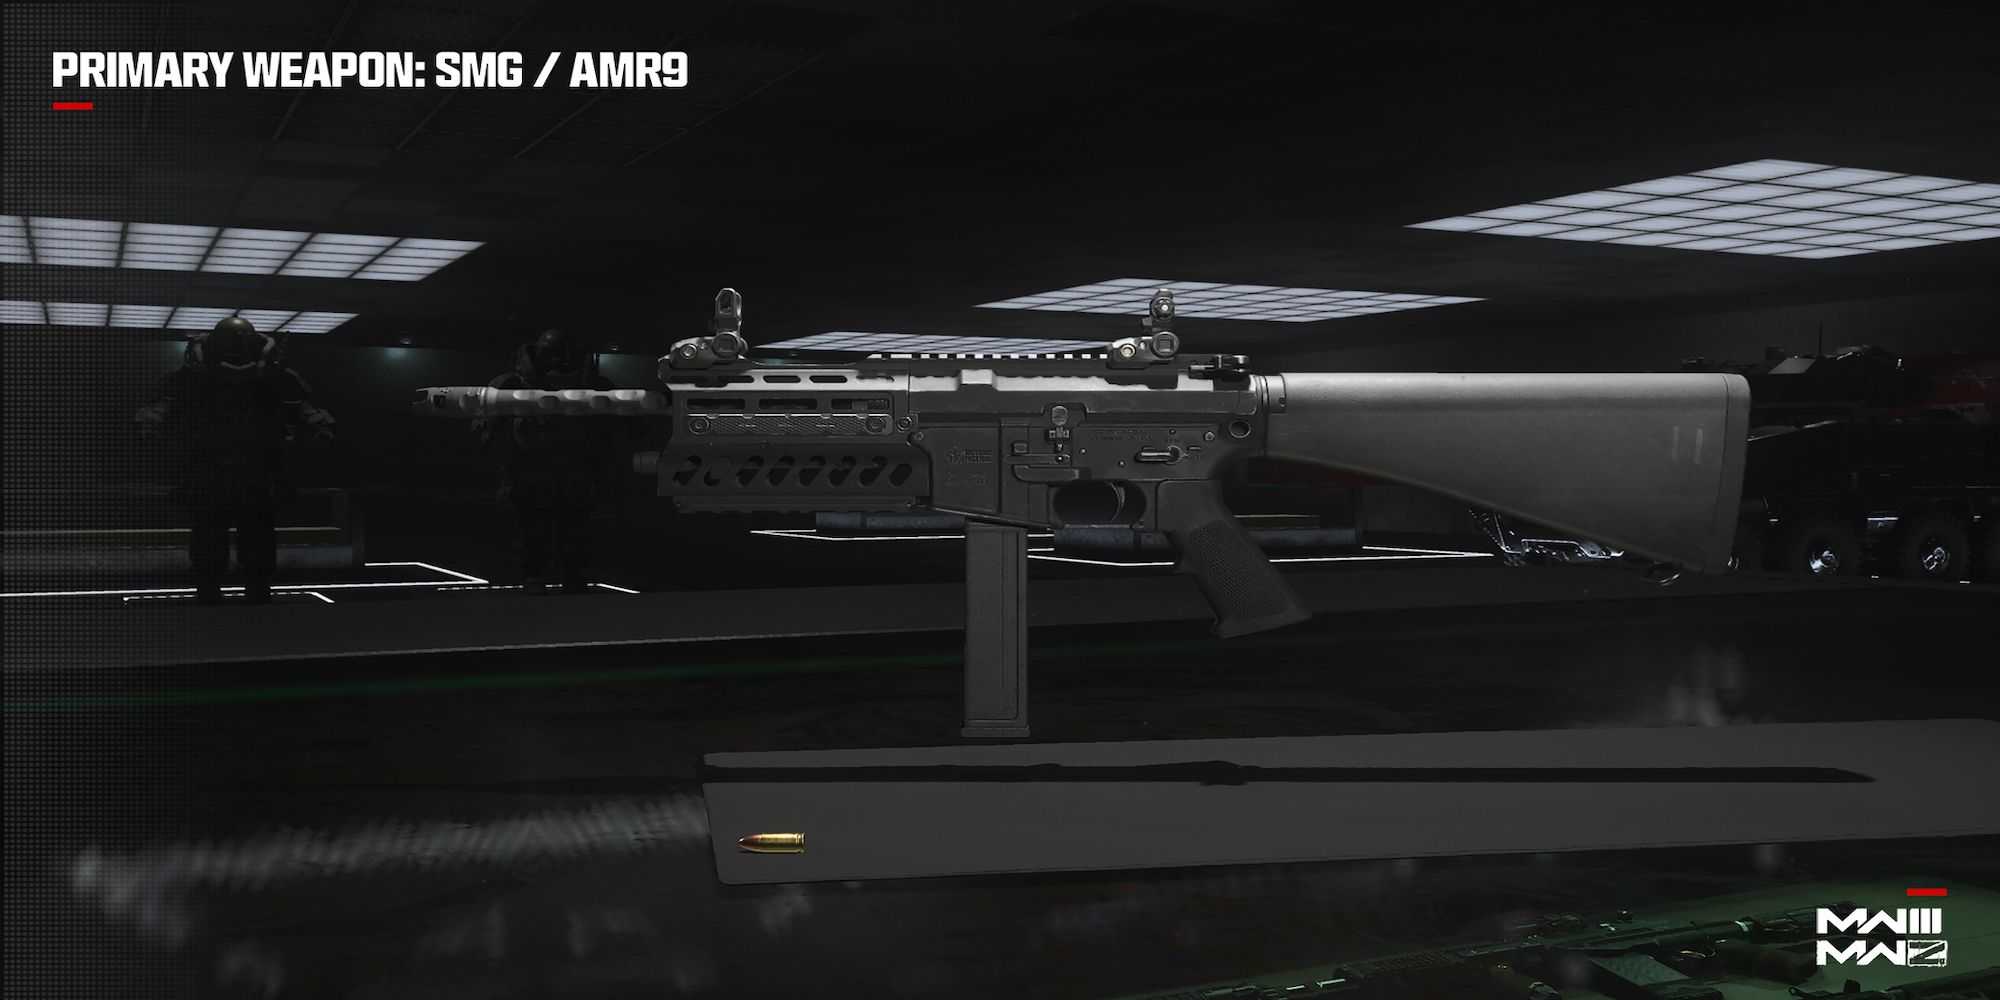 The best SMGs in Call of Duty: Modern Warfare 3 excel in close-quarters combat.